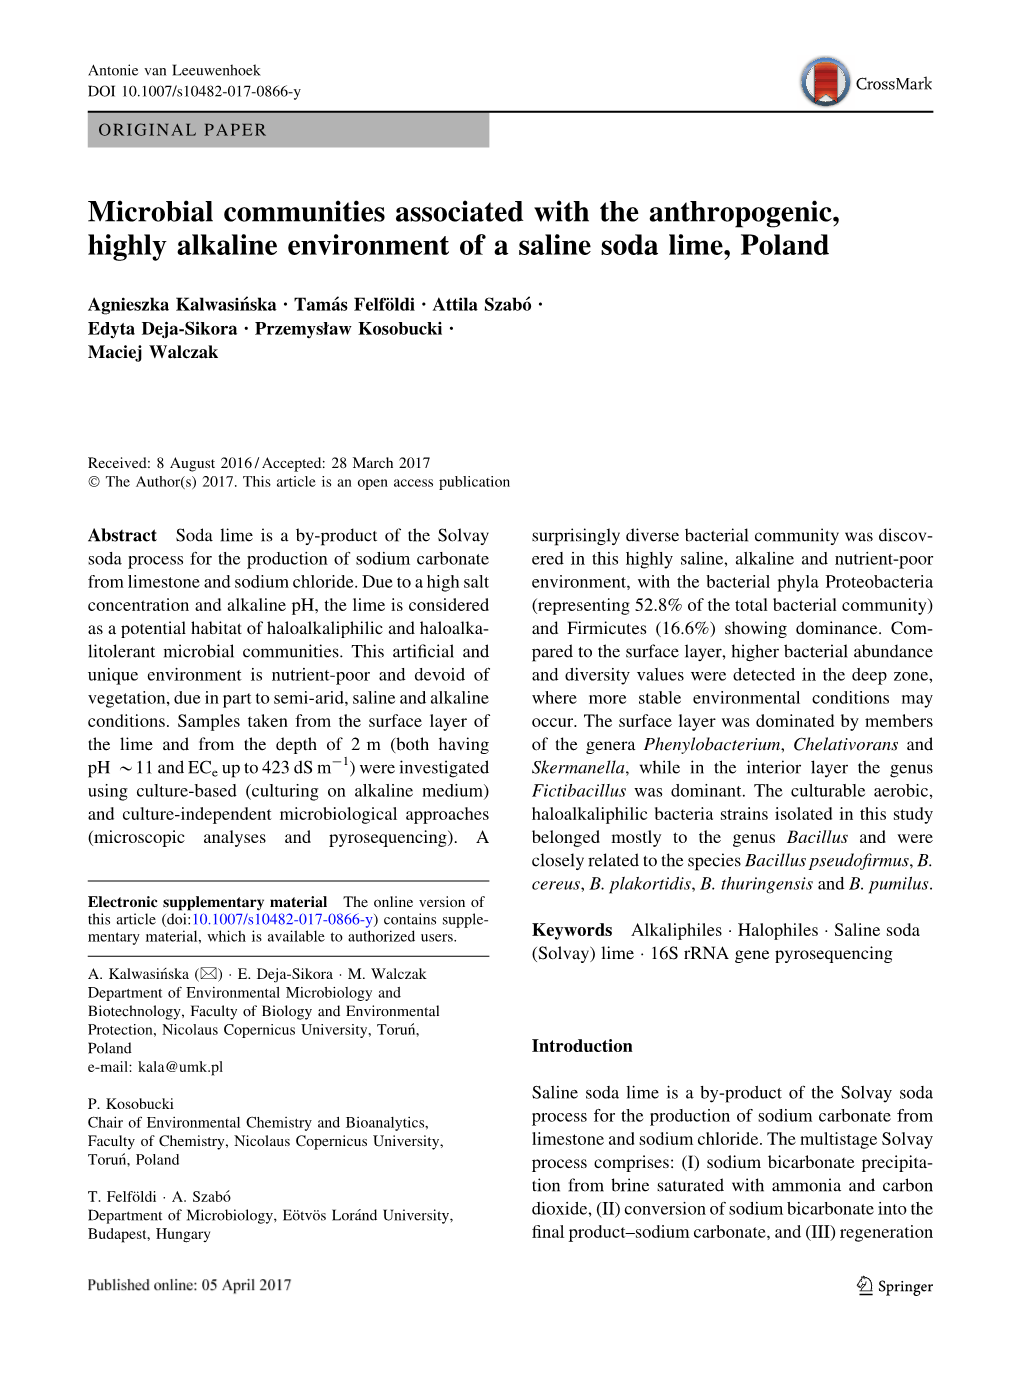 Microbial Communities Associated with the Anthropogenic, Highly Alkaline Environment of a Saline Soda Lime, Poland